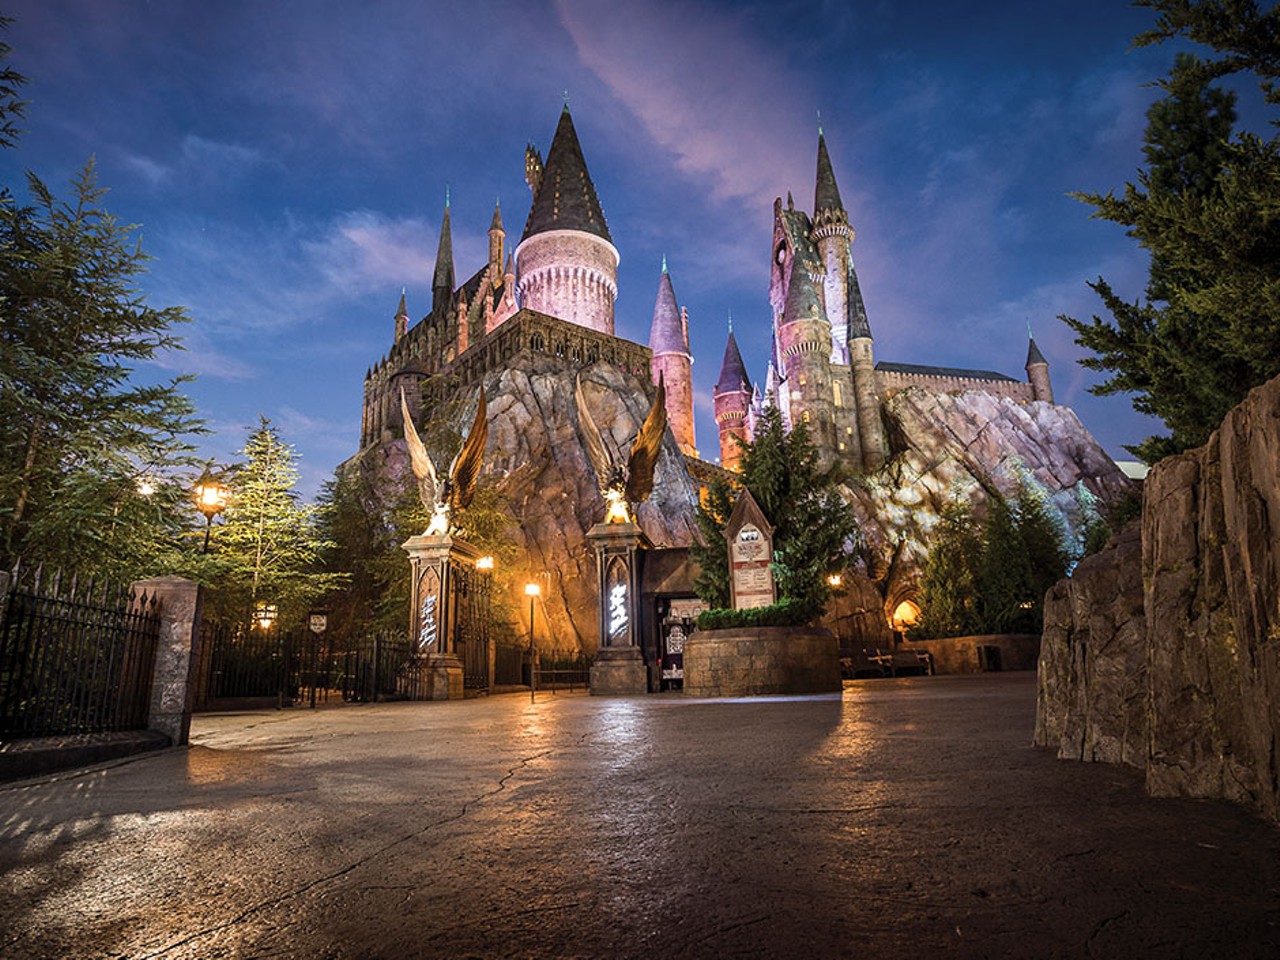 Hogwarts Castle 
6000 Universal Blvd.
This recreated Harry Potter castle is just around the corner from Diagon Alley and Hogsmeade village. Make sure to snap a picture after riding the Harry Potter and the Forbidden Journey. 
Photo via Universal Orlando/Facebook